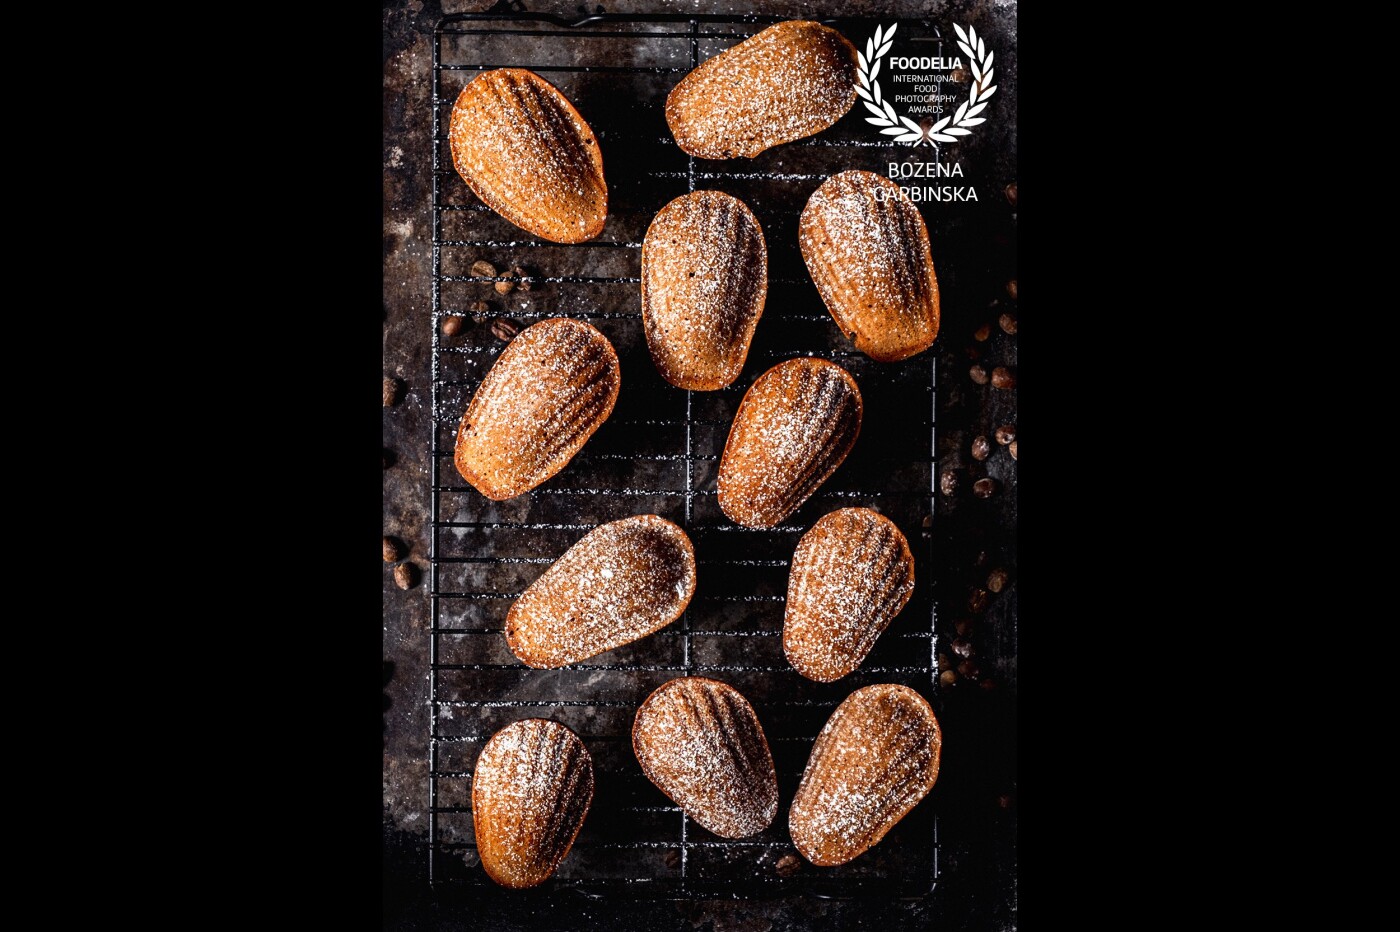 Coffee madeleines.<br />
Camera: Fuji X-T3<br />
Lens: Fujinon 16-55 mm<br />
Settings: ISO 160, 34.2 mm, 1/5 s, f/5.0<br />
Shot using natural light.